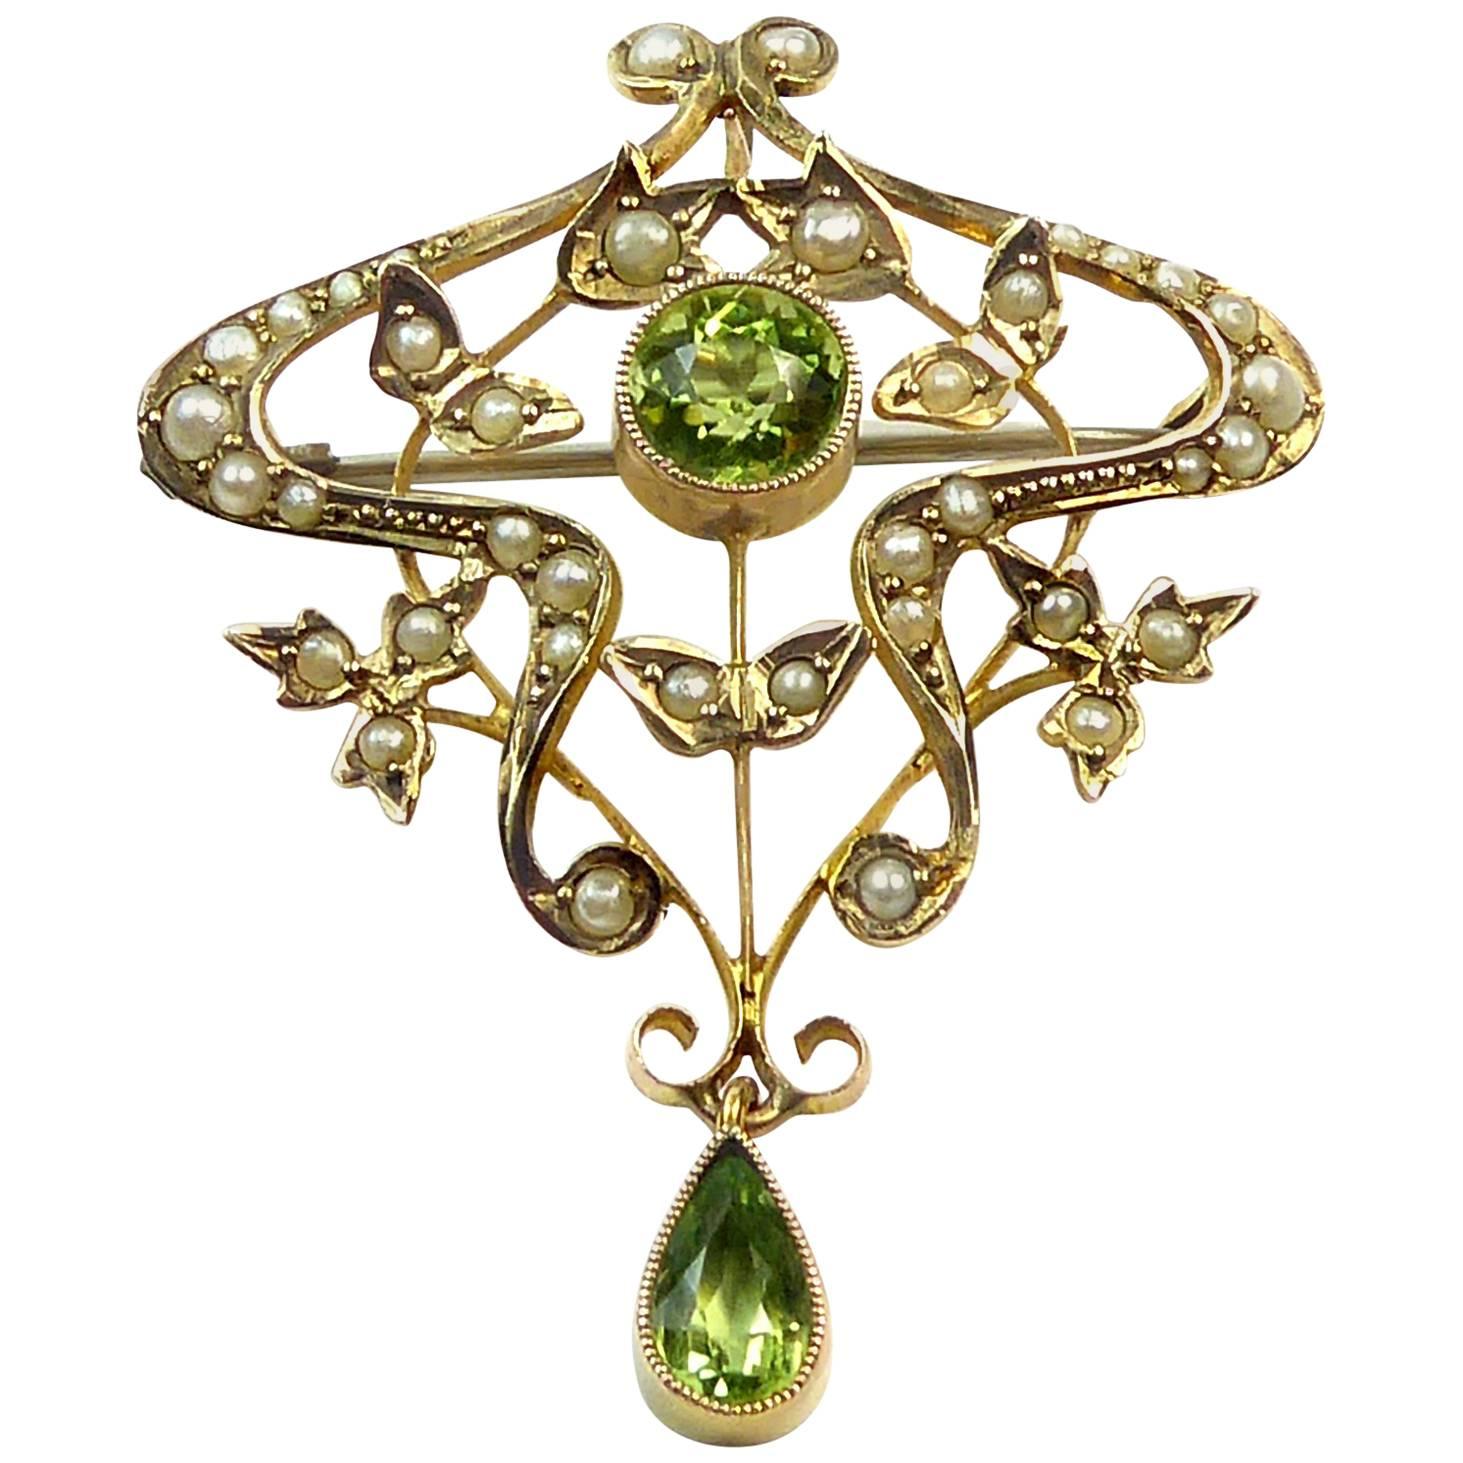 Antique Art Nouveau Pendant Brooch with Peridots and Pearls, circa 1900